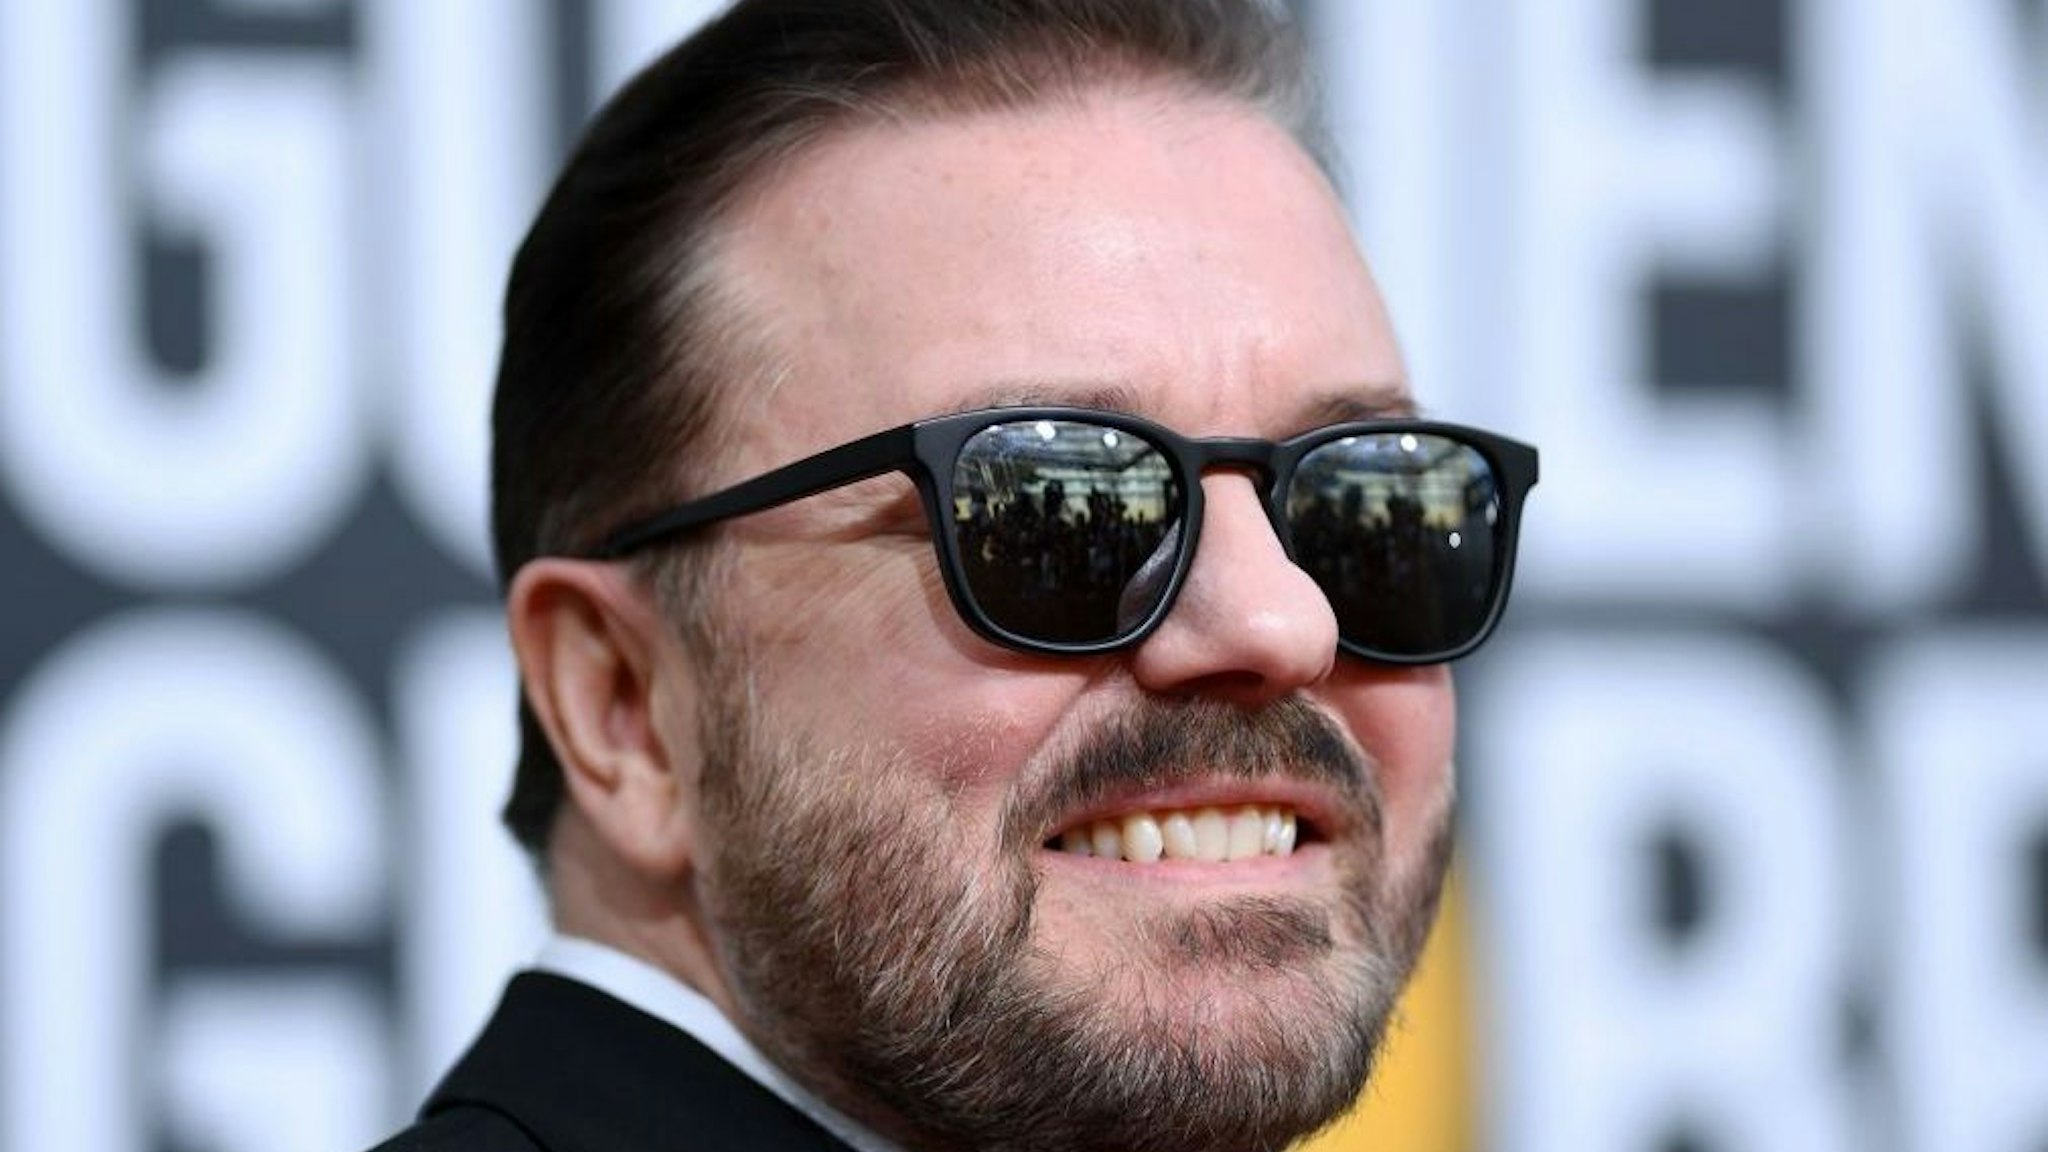 British host Ricky Gervais arrives for the 77th annual Golden Globe Awards on January 5, 2020, at The Beverly Hilton hotel in Beverly Hills, California.